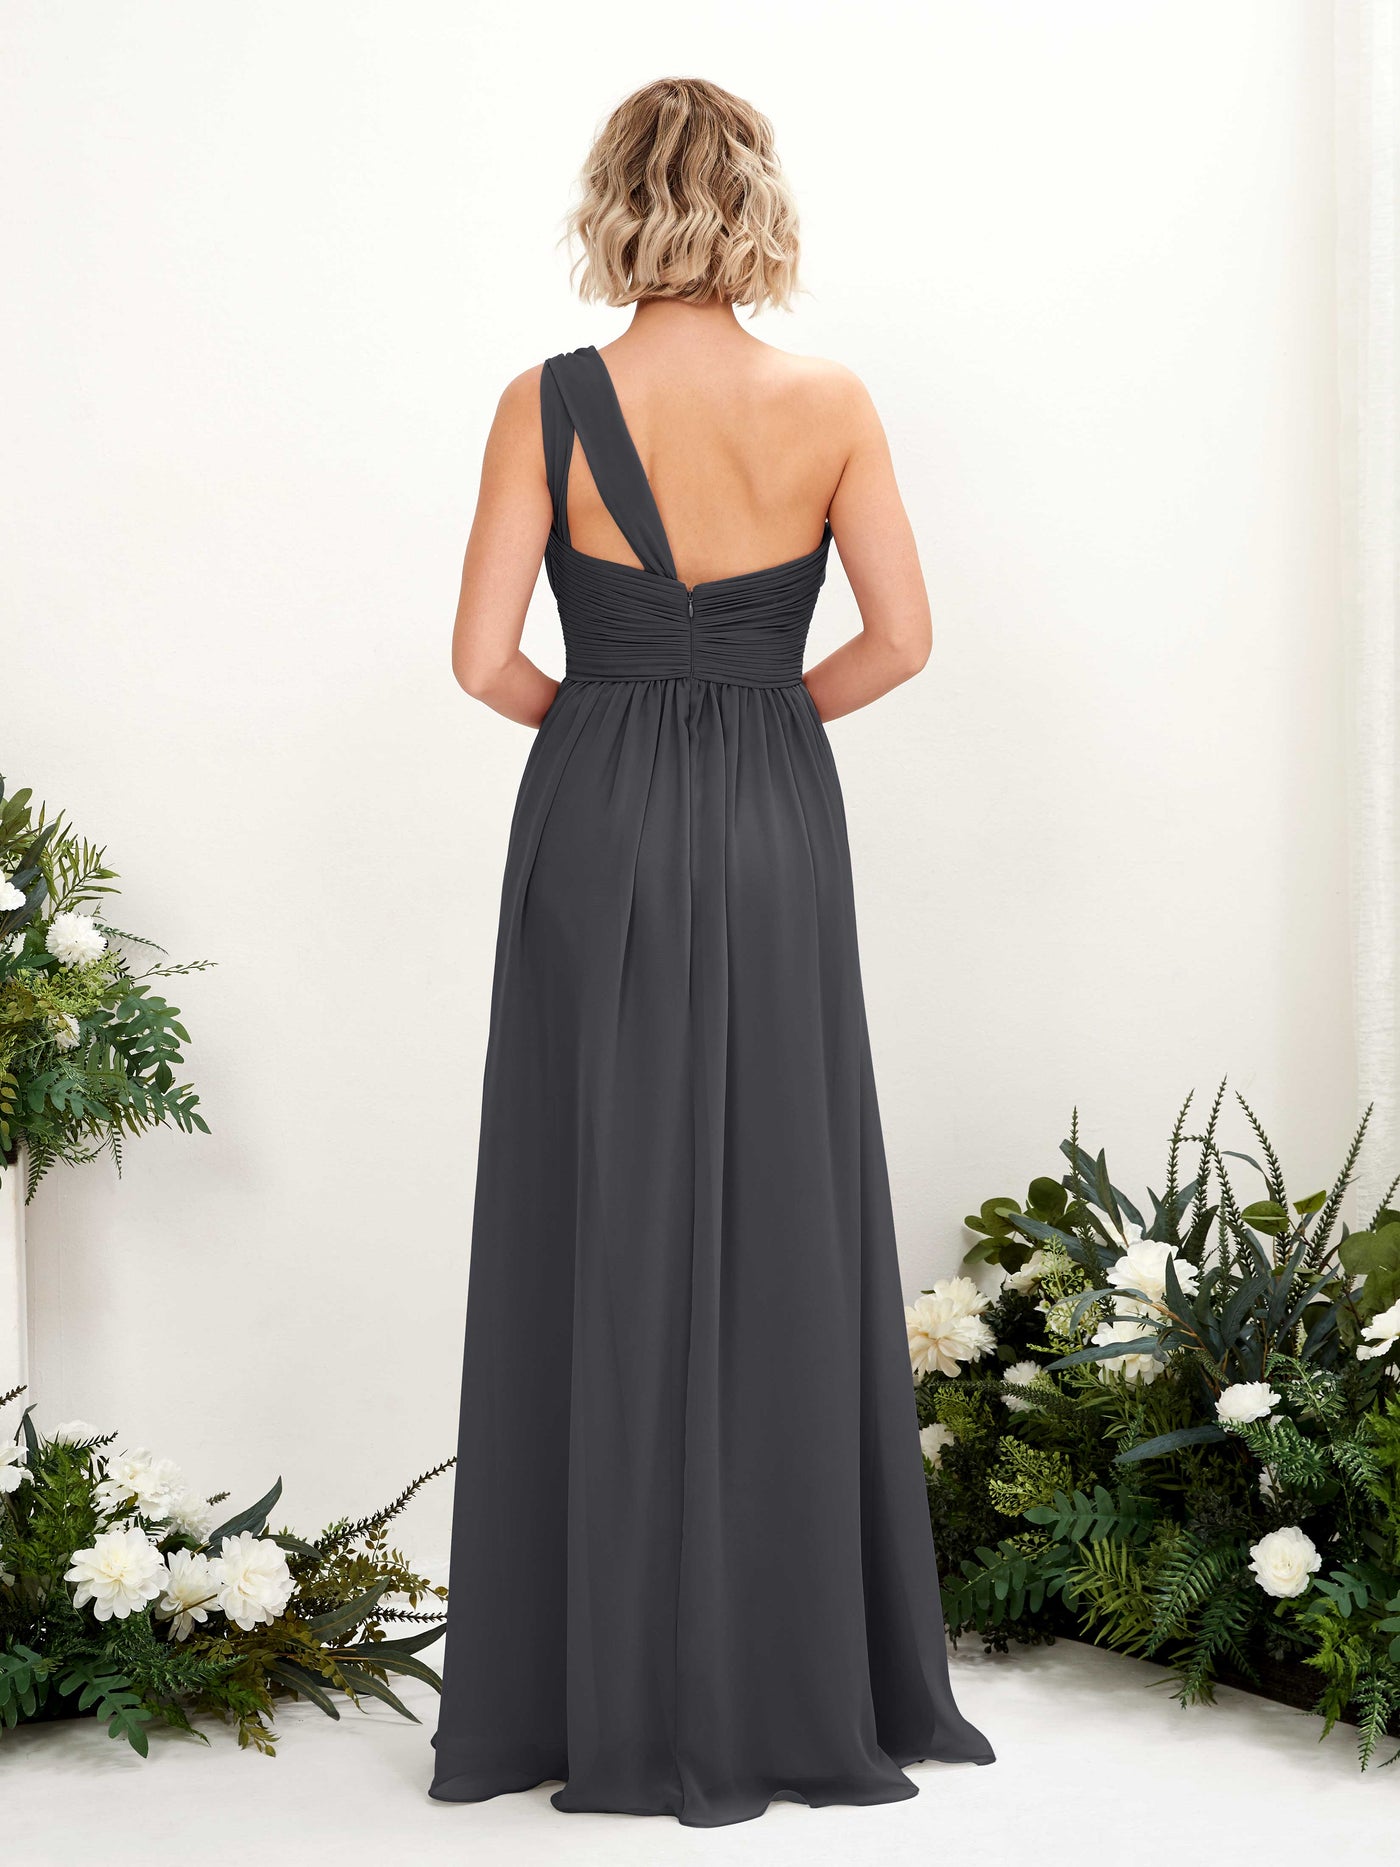 Pewter Bridesmaid Dresses Bridesmaid Dress Ball Gown Chiffon One Shoulder Full Length Sleeveless Wedding Party Dress (81225038)#color_pewter